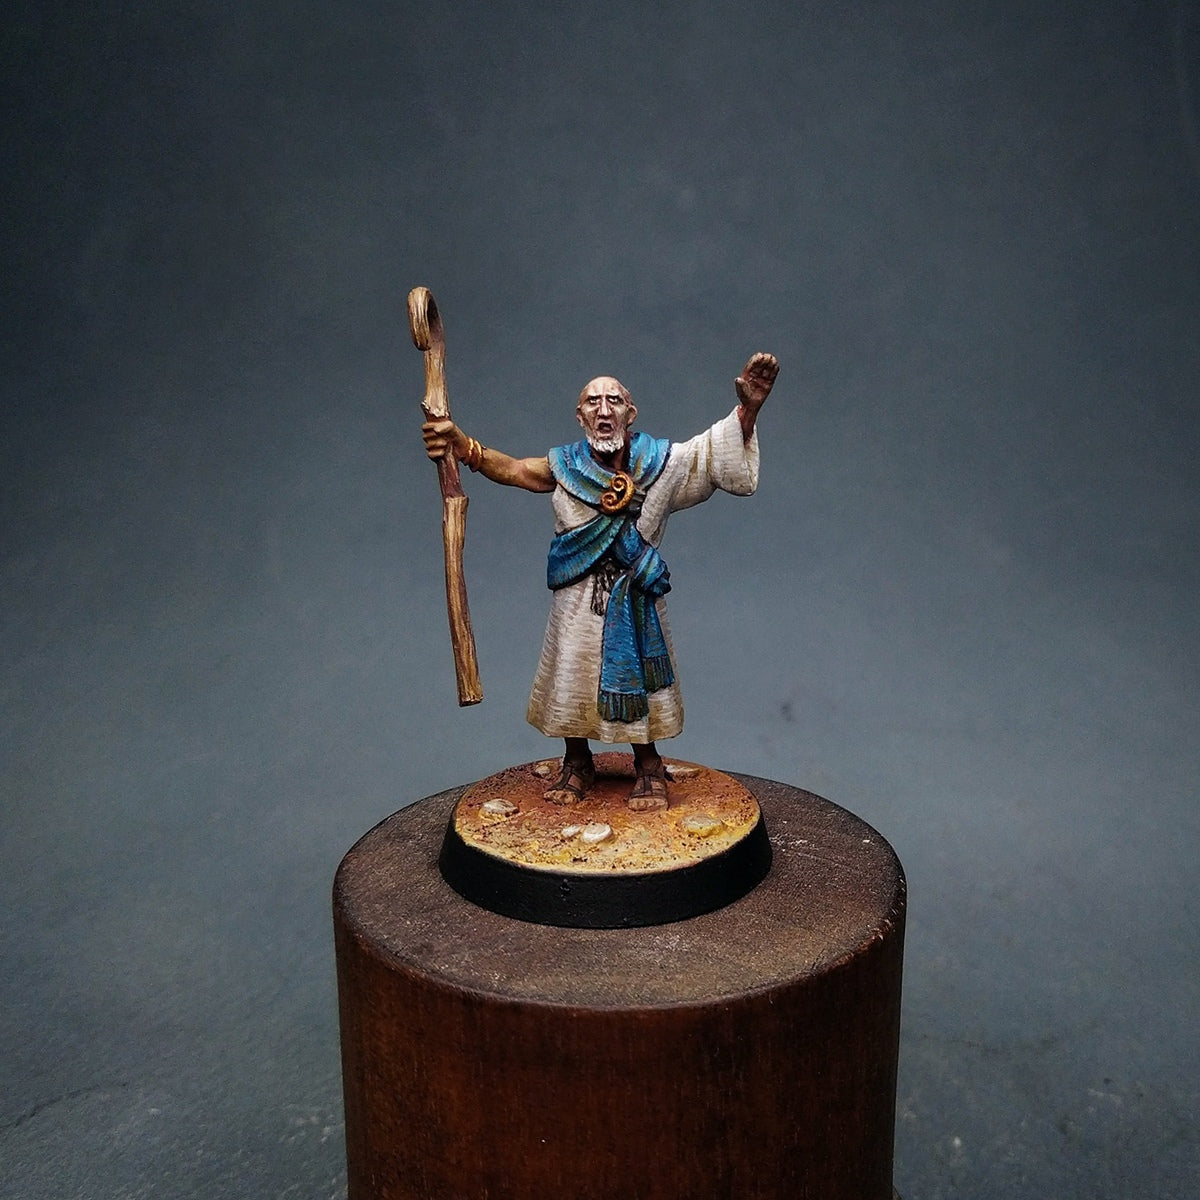 Priest (druid) miniature for SAGA, 28mm resin by Brother Vinni.